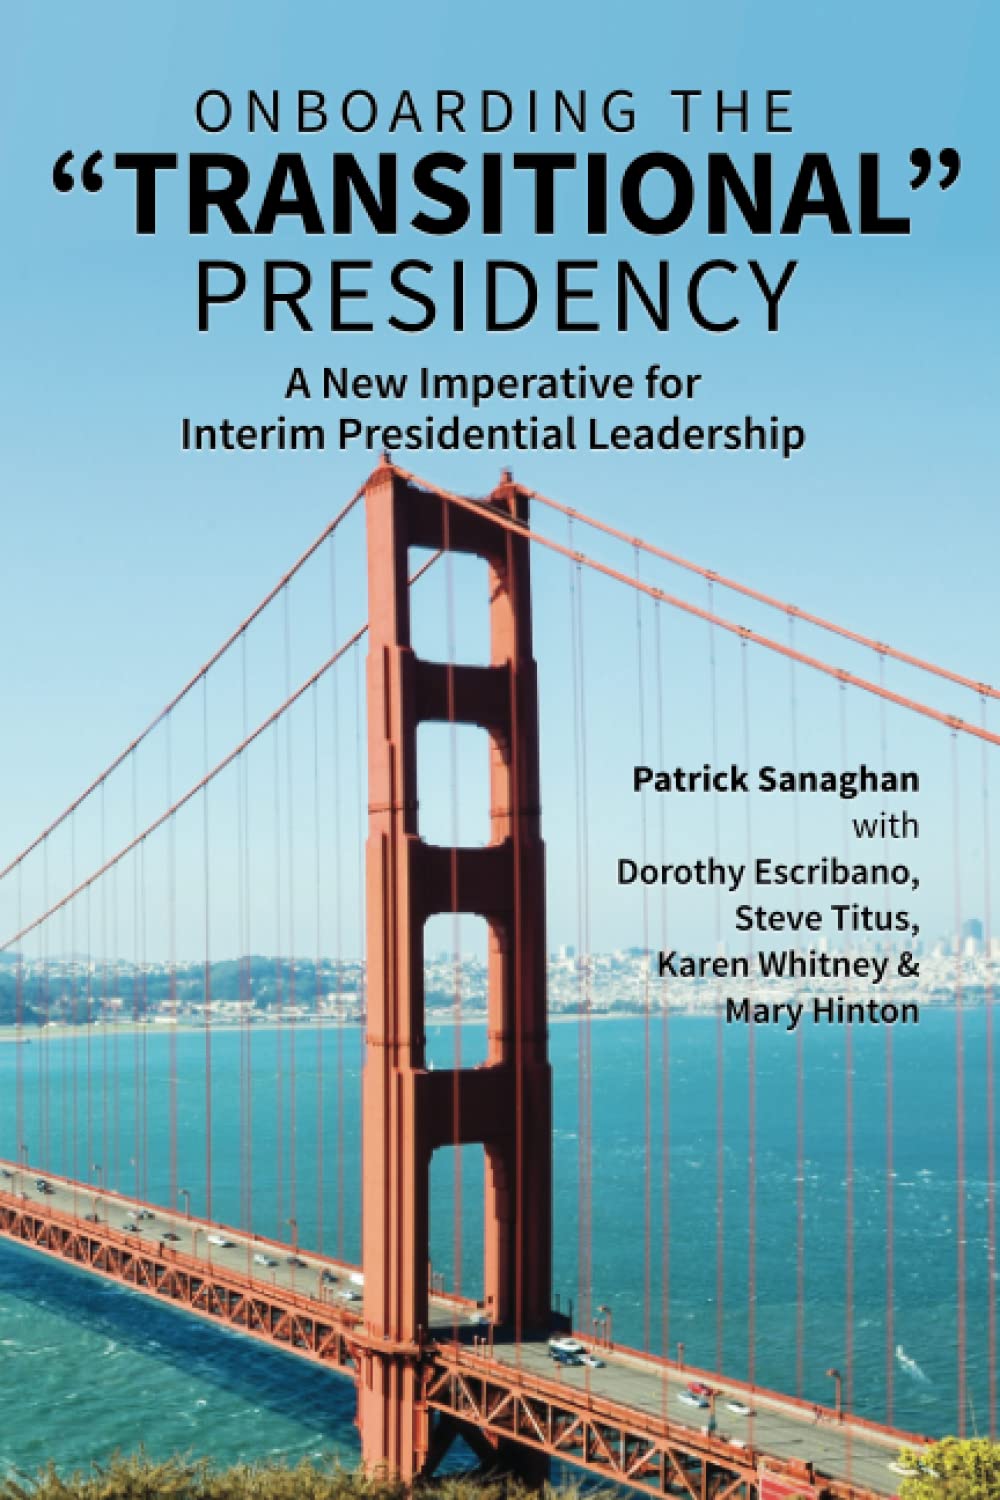 Author’s Tranquility Press Supports Patrick Sanaghan As He Teaches Leadership Transitions in On Boarding the "Transitional" Presidency